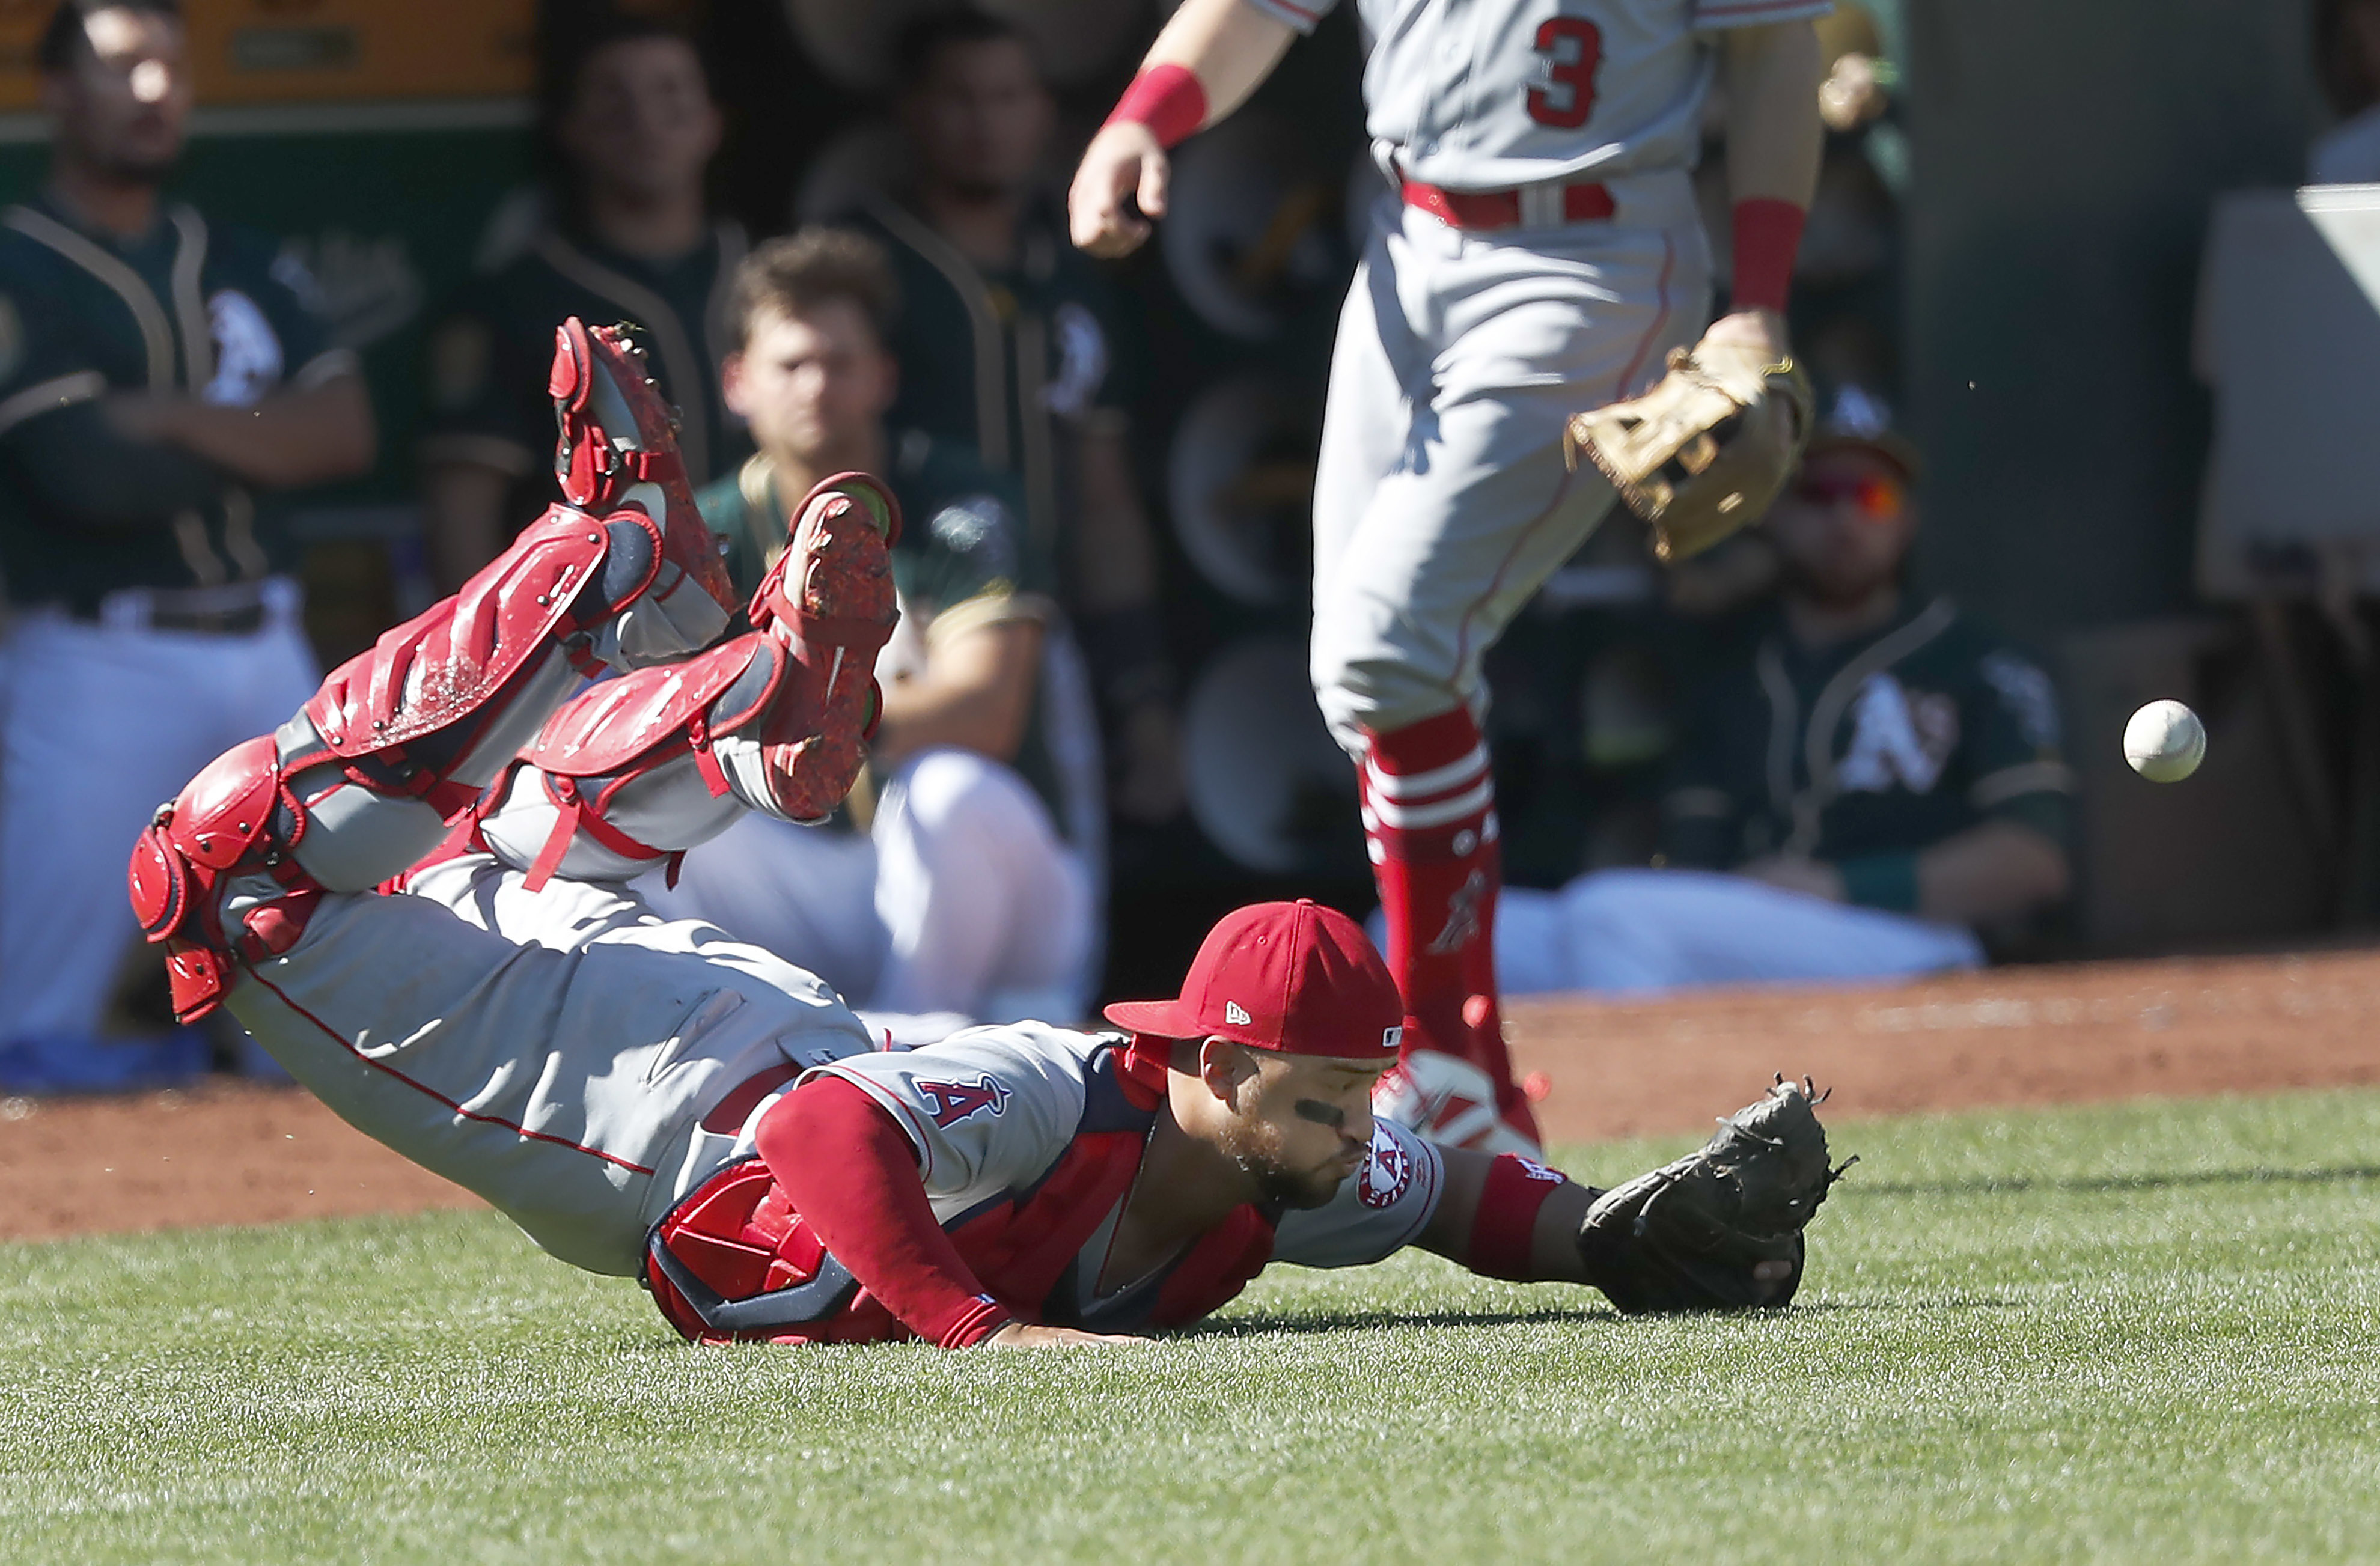 Busy day lands Angels' Arcia in baseball record books